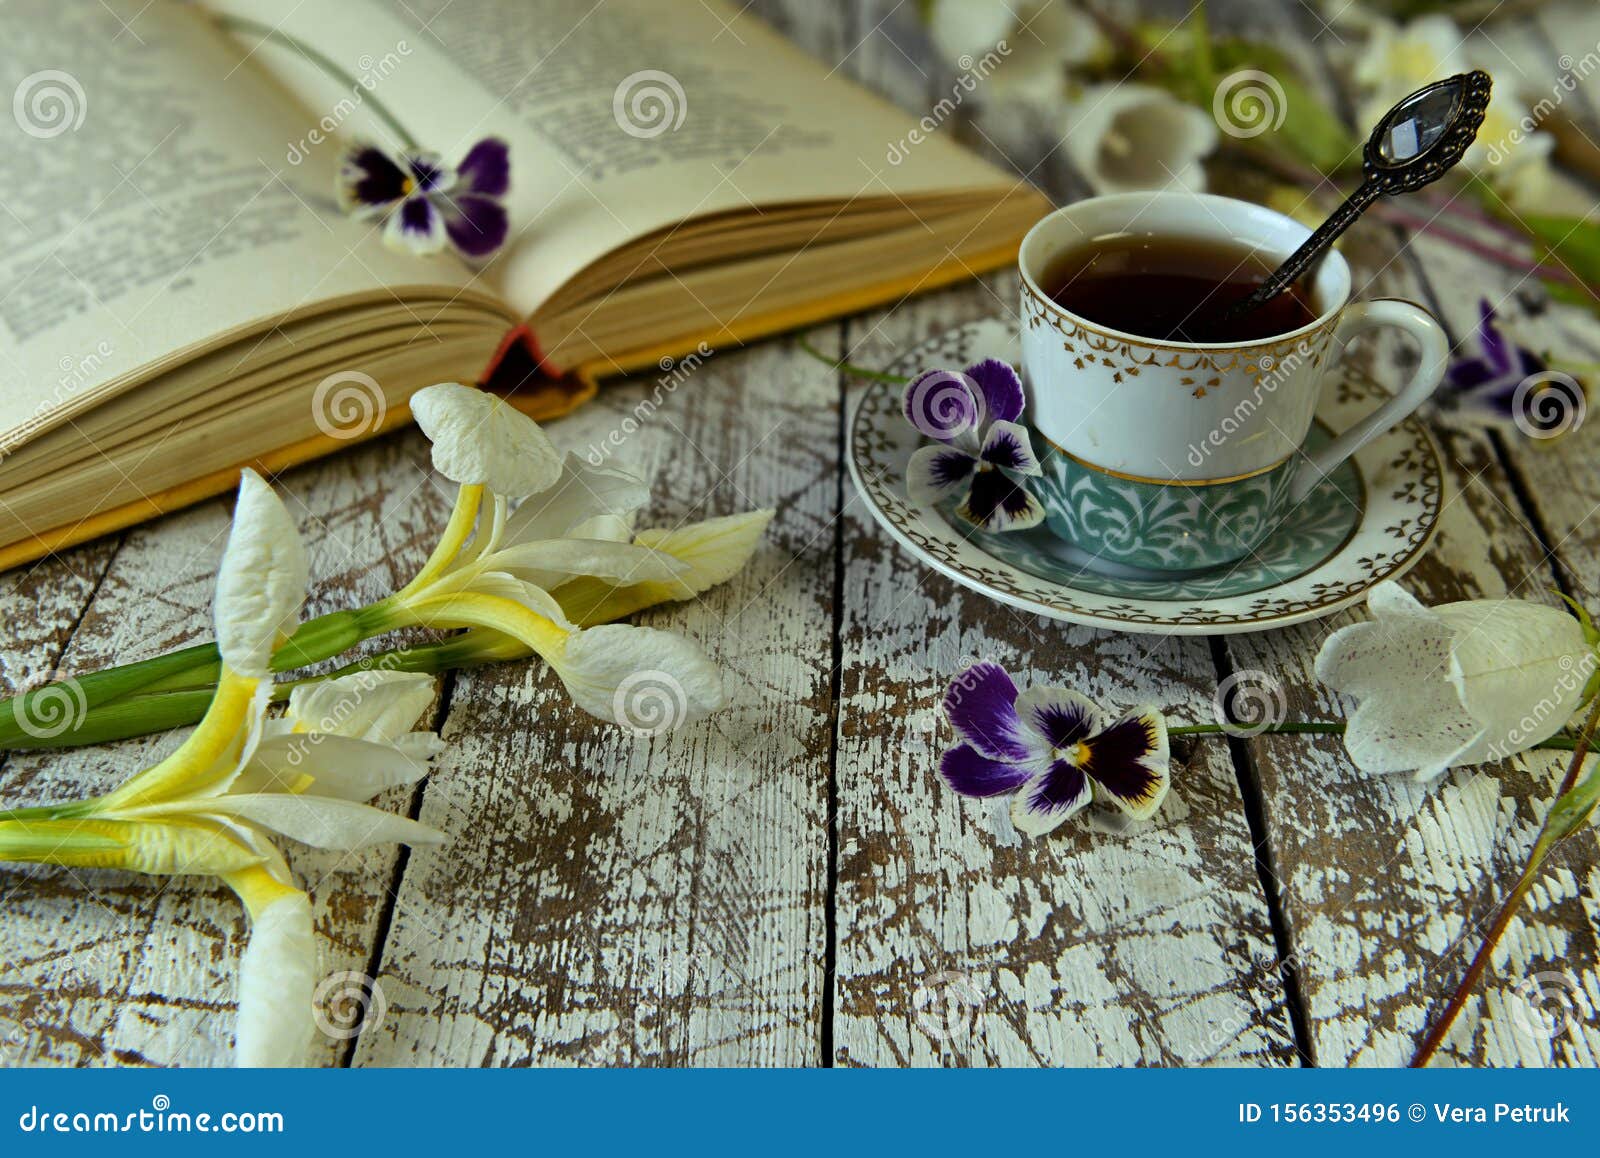 https://thumbs.dreamstime.com/z/open-book-poetry-old-cup-tea-flowers-table-vintage-still-life-literature-reading-concept-156353496.jpg